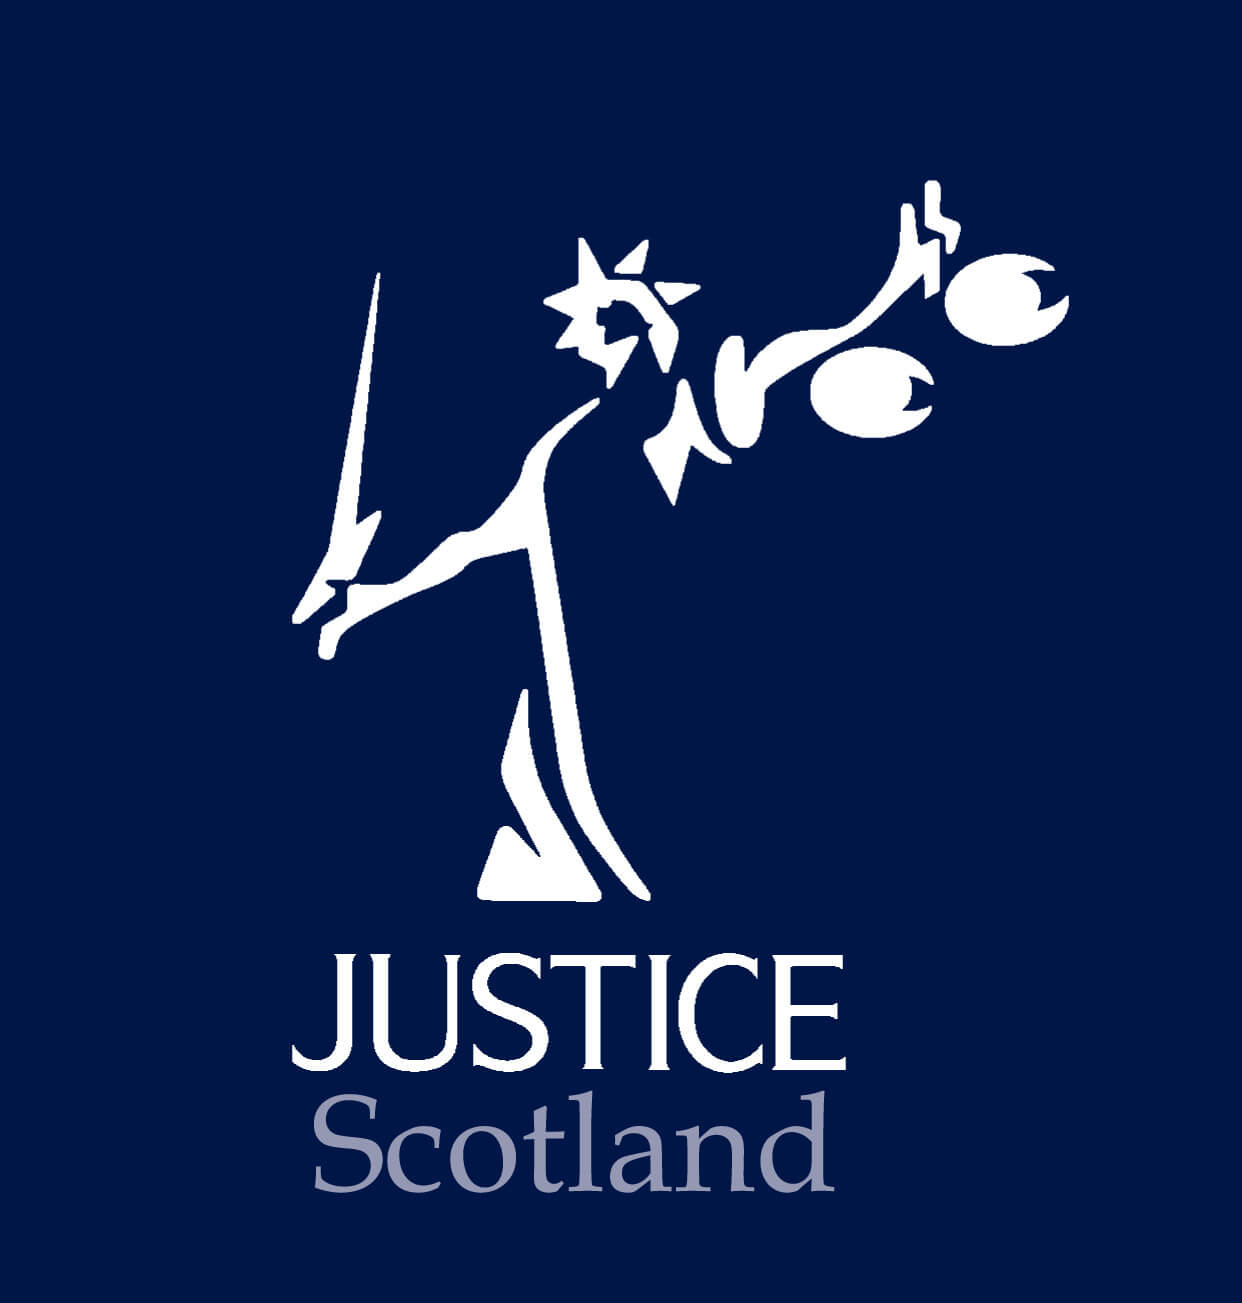 White and Blue People Logo - Our people - Scotland - Justice